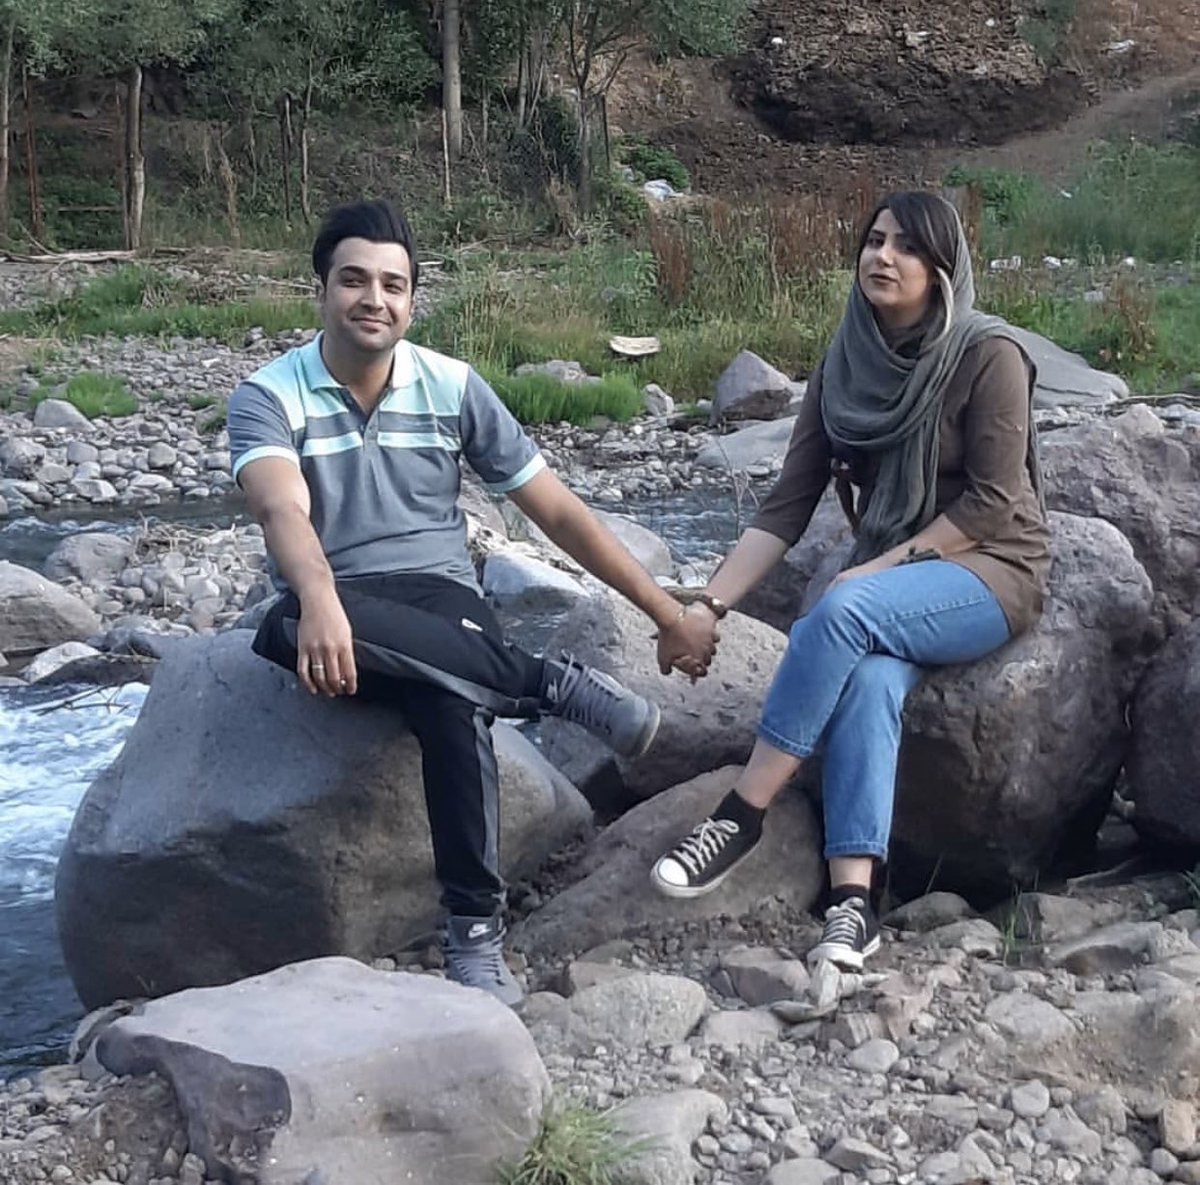 Hamid Rasouli, next to his wife. He was killed by two bullets in Golshahr, Karaj by Khamenei’s mercenaries during the  #IranProtests. Bless your soul and path. Rest in power 